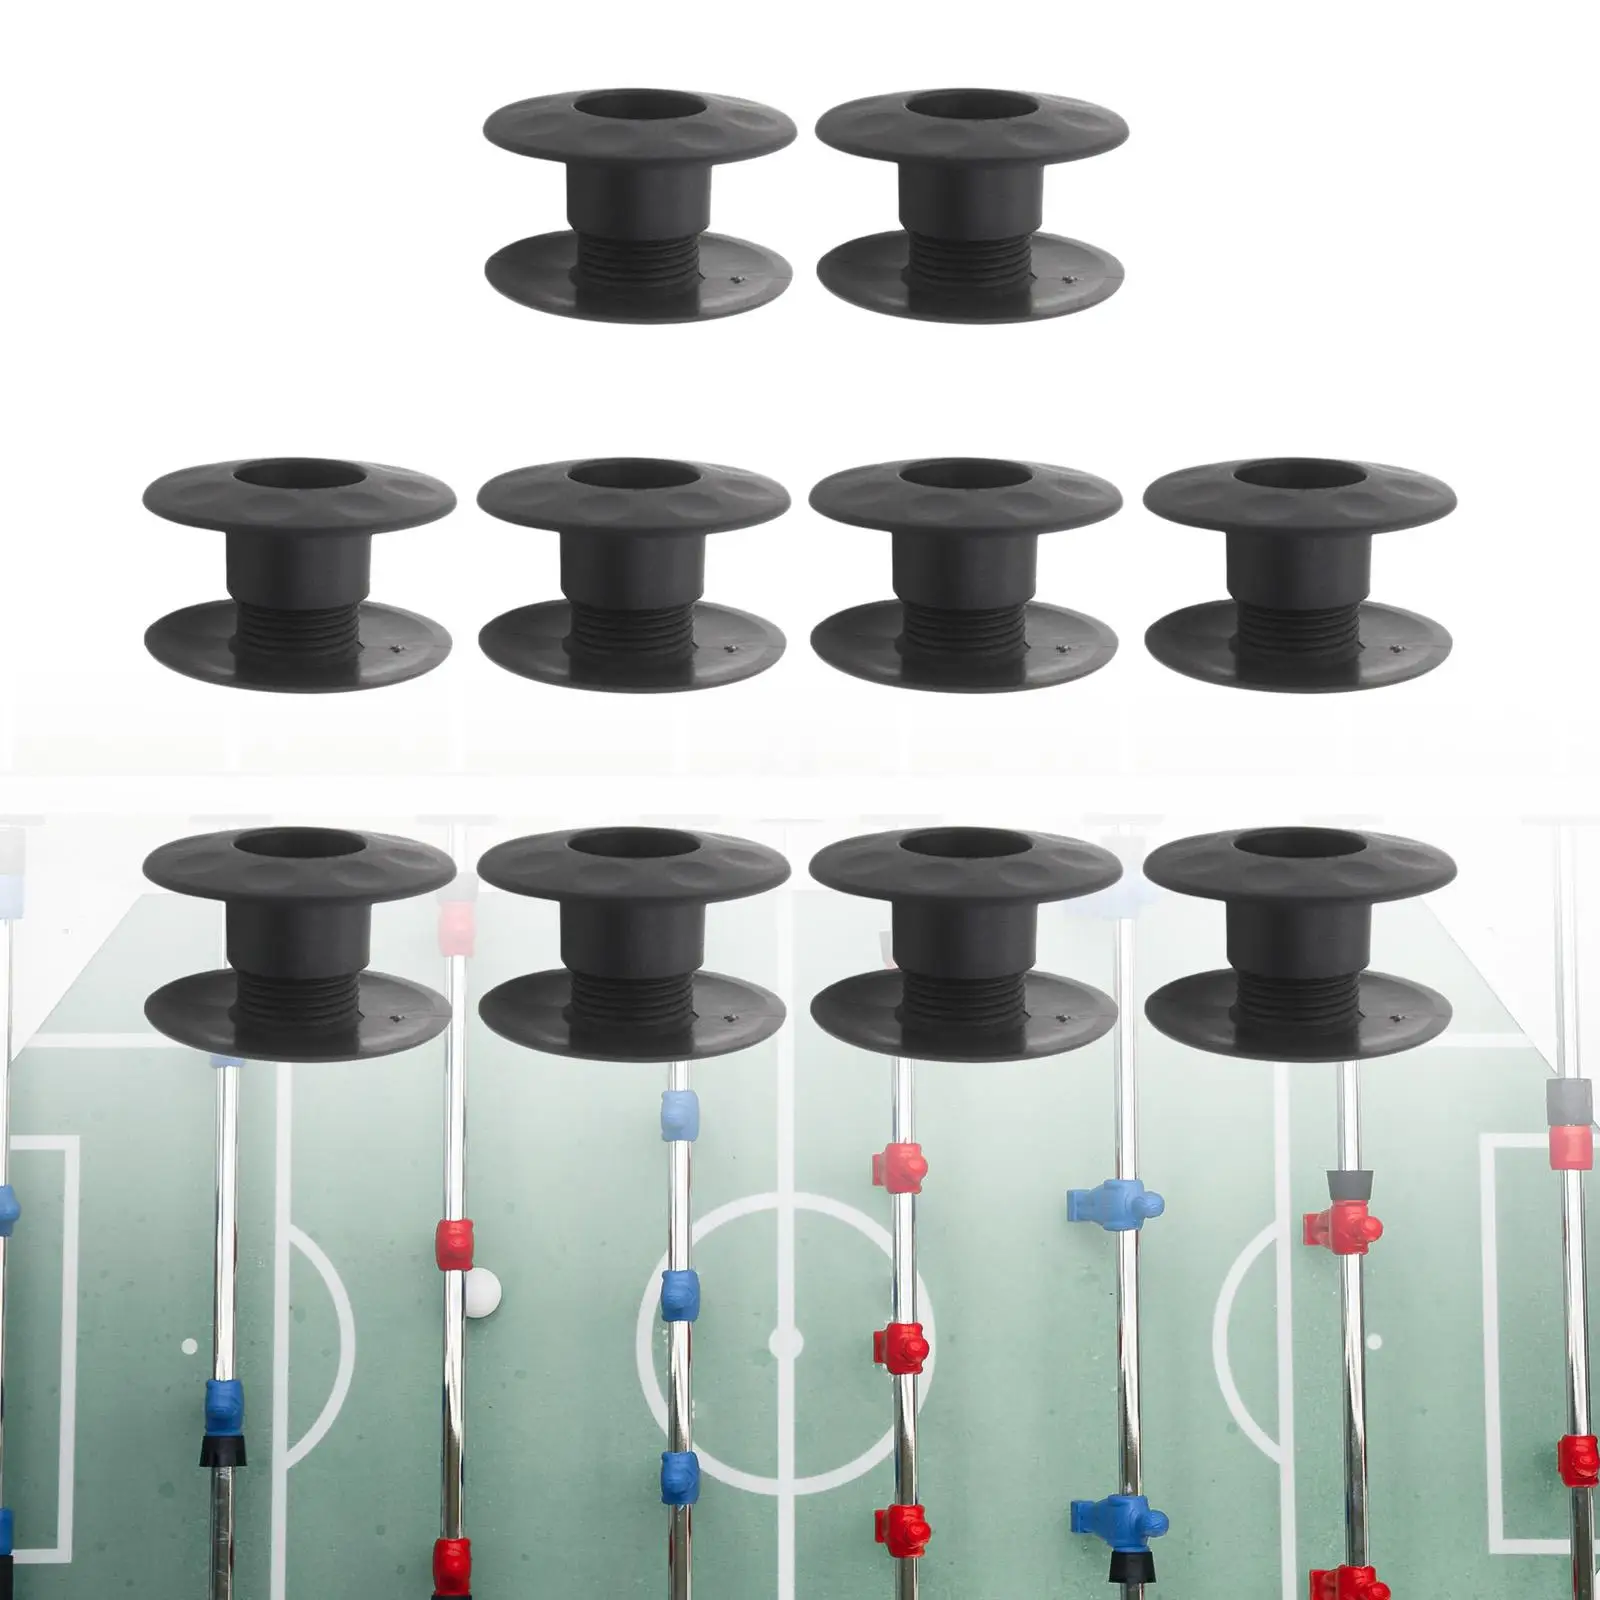 10x Foosball Machine Bearing Rods Replacement Parts Fun Games Accessories